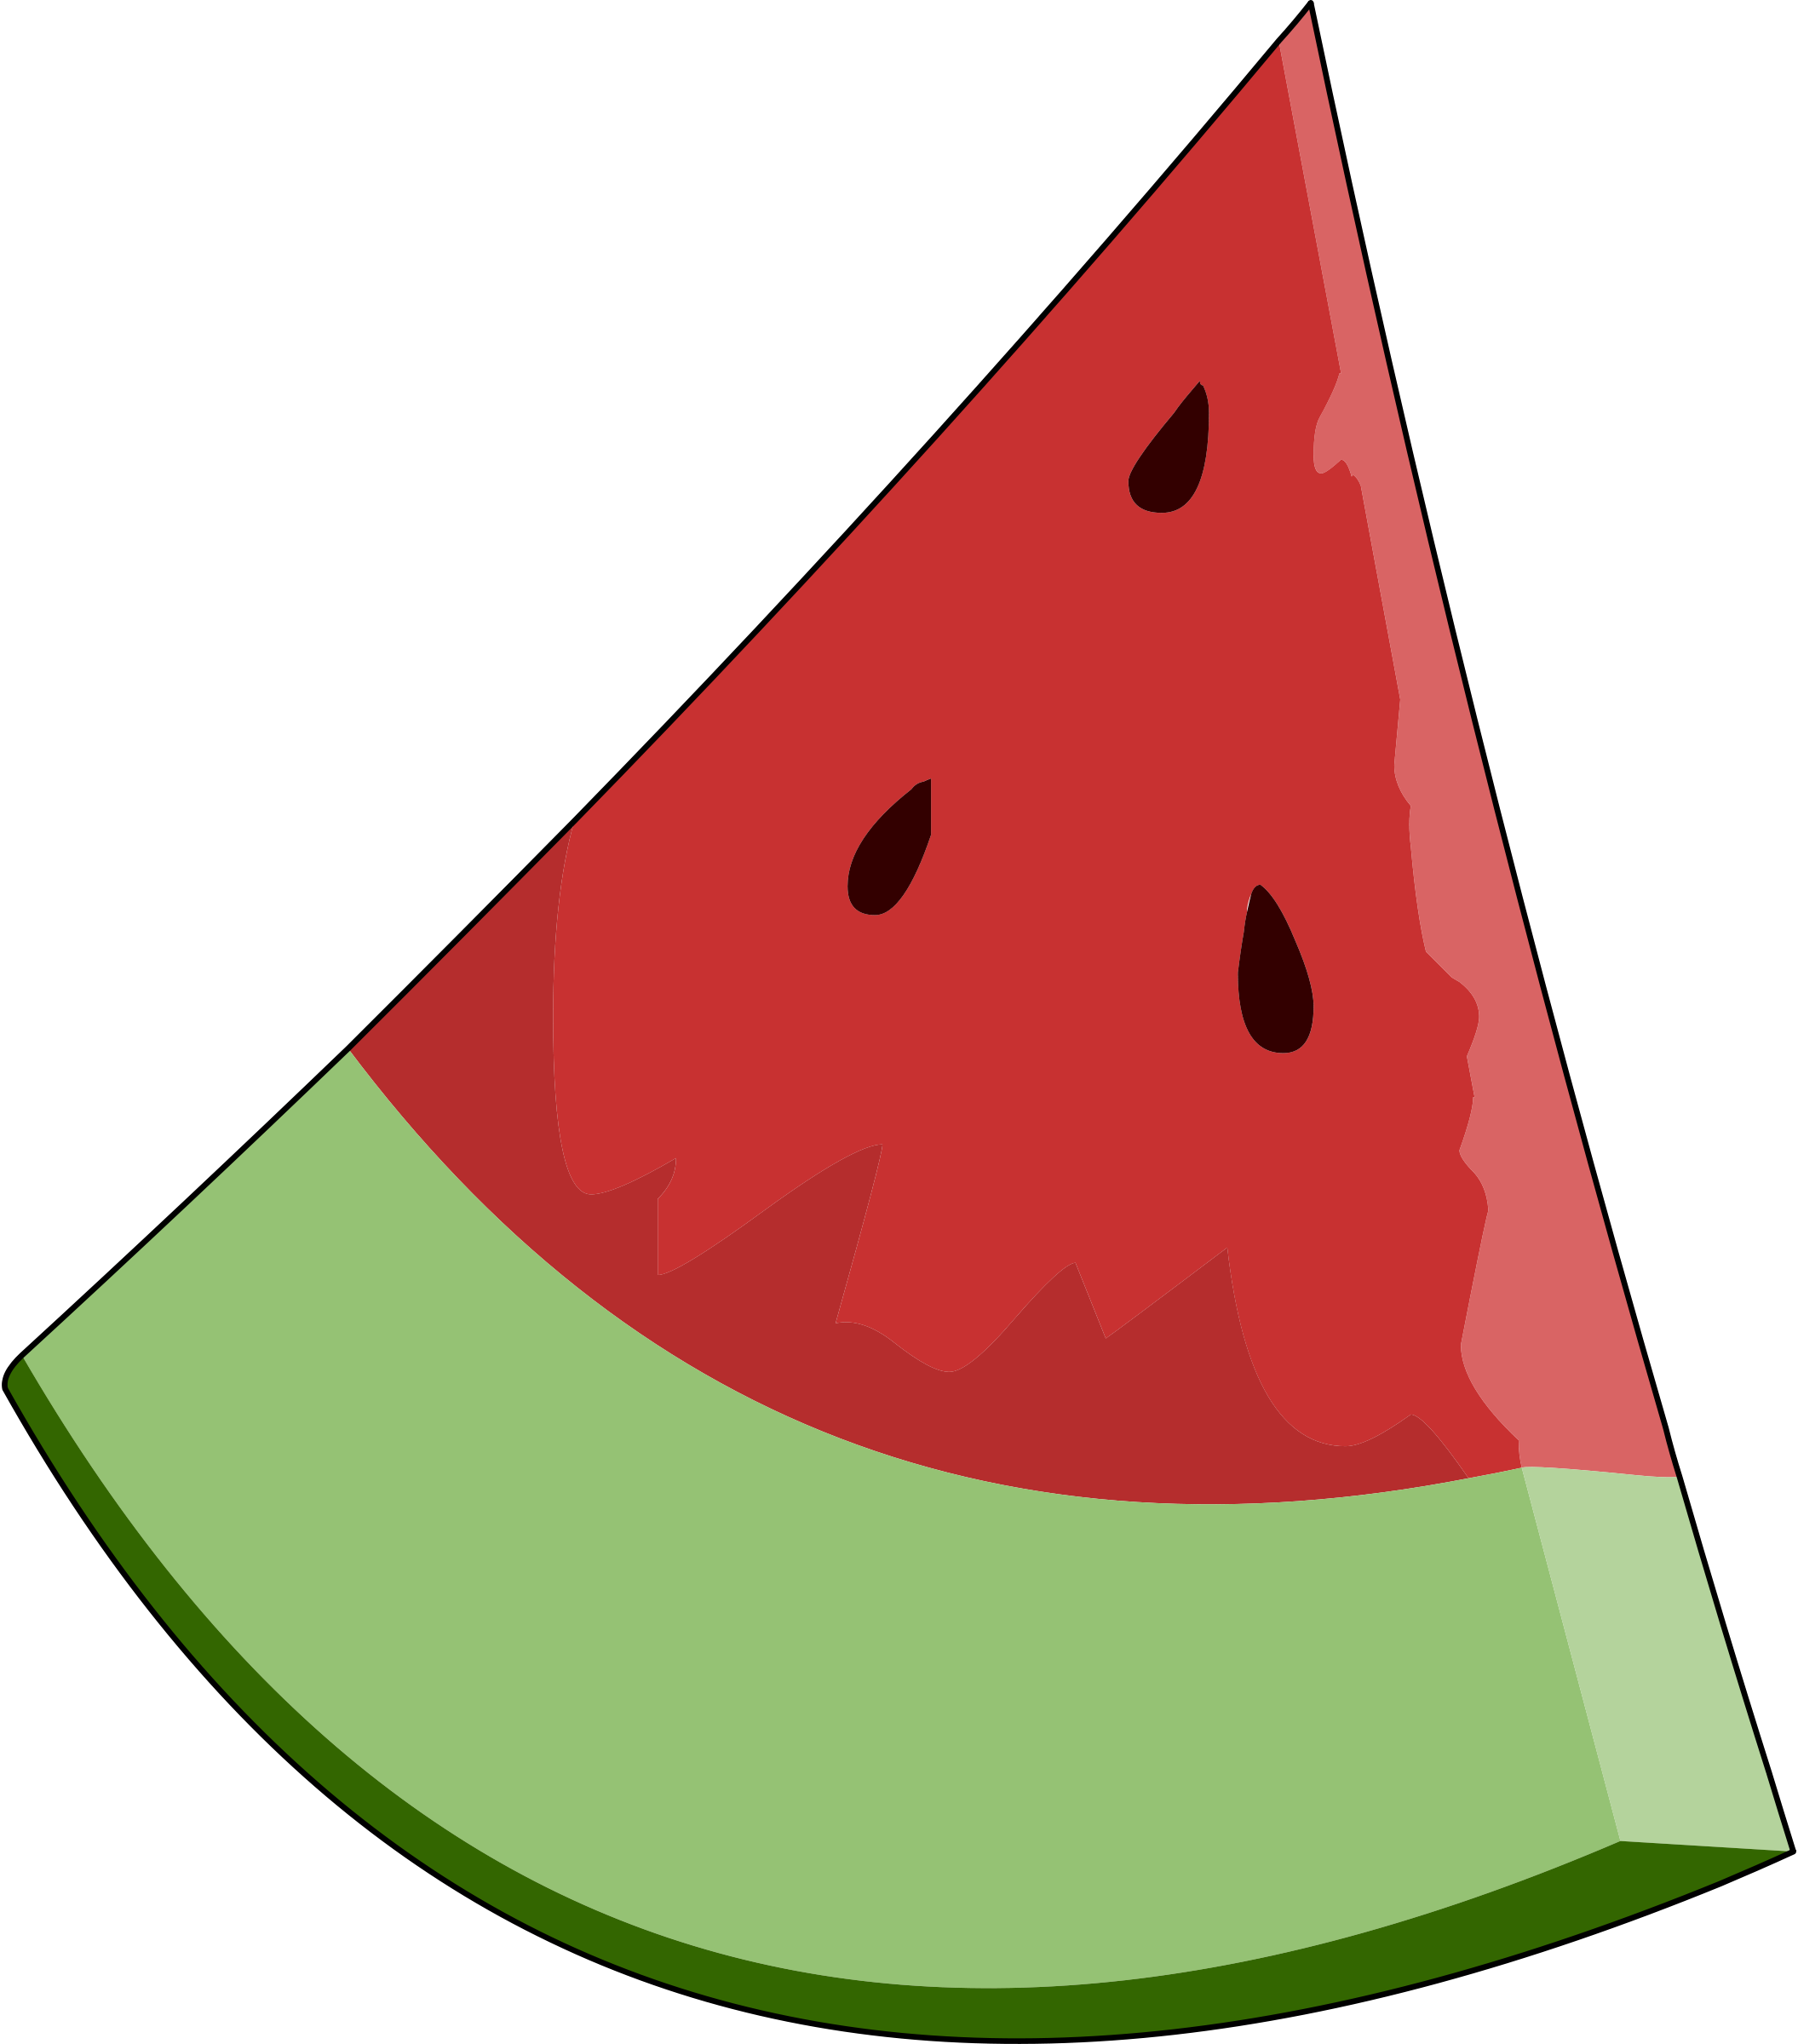 Clip Art Of A Watermelon For You Clipart